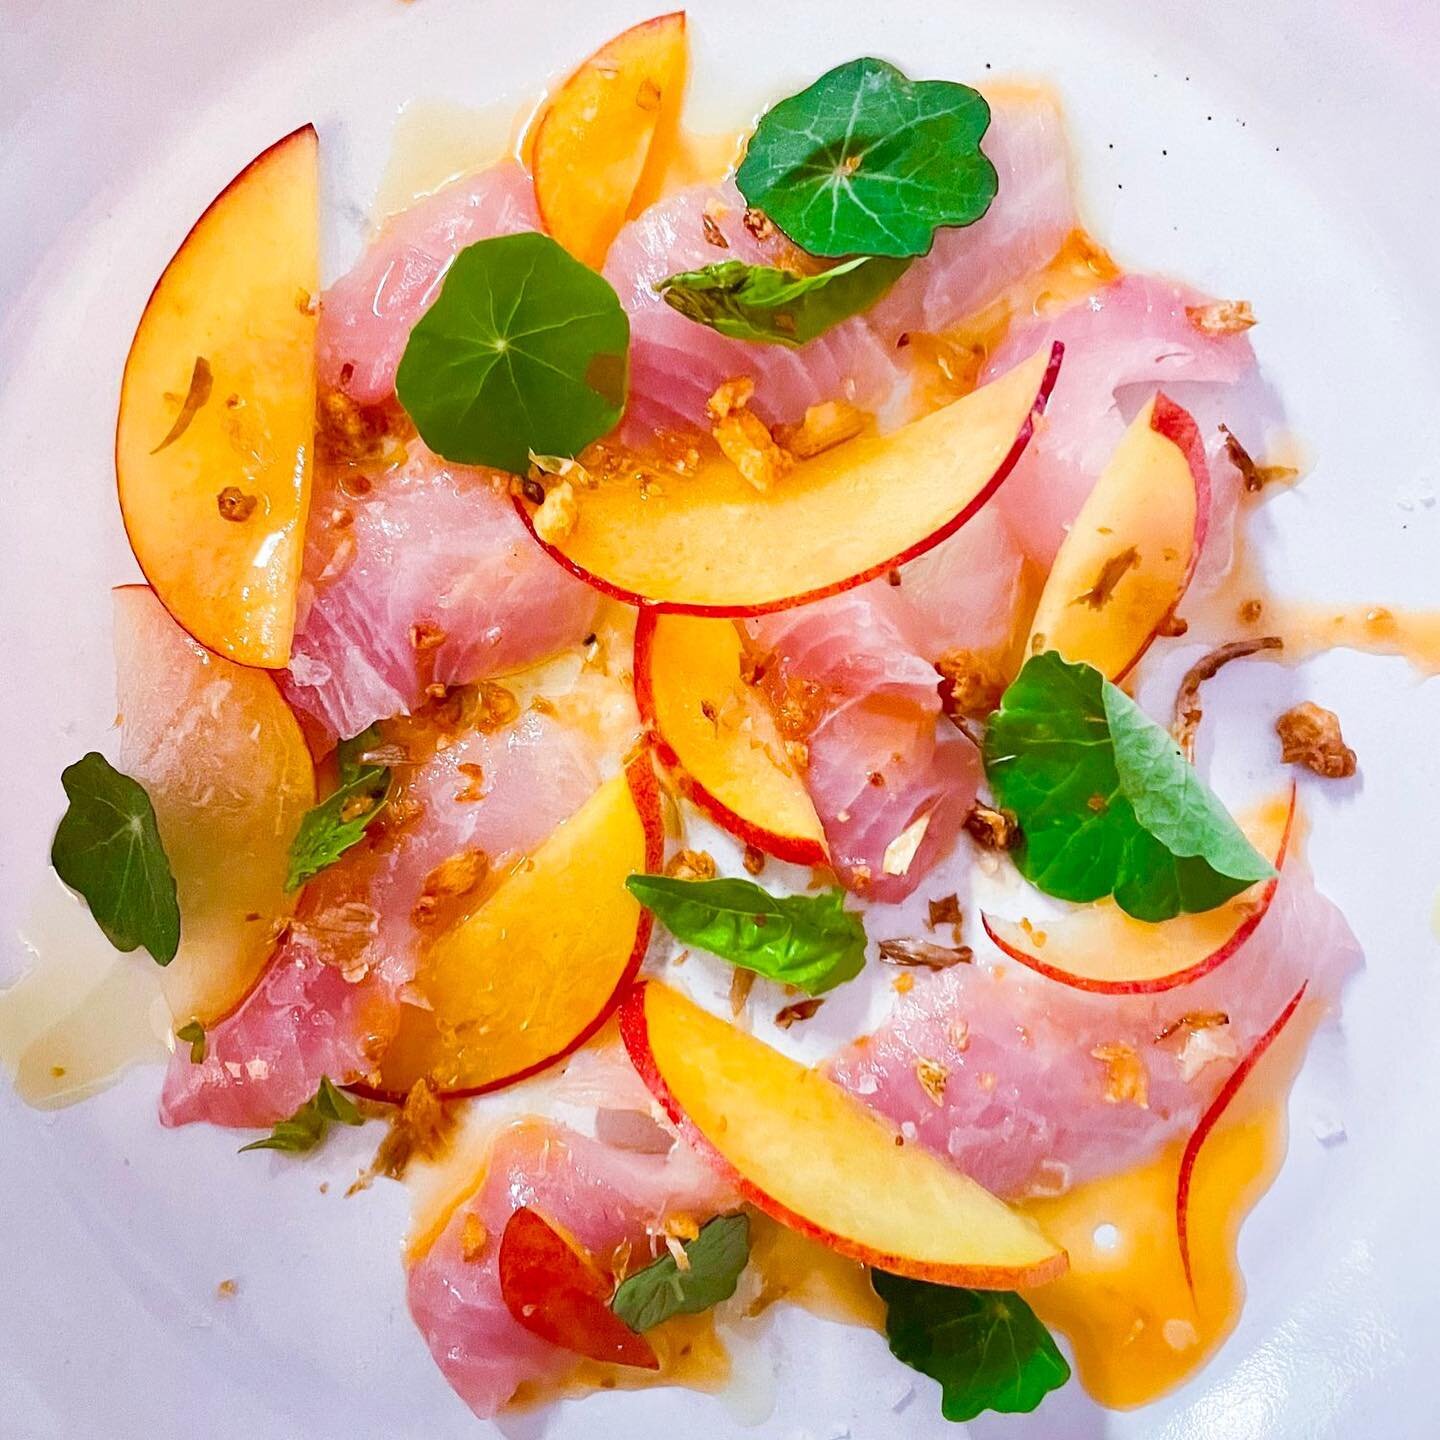 Peach Nuoc Cham
Recipe from Patrick Costa @chefpcosta of @delanonna_la 

&ldquo;This dressing works great with kanpachi or scallop crudo.&nbsp; I also love this on lightly grilled green vegetables like green beans, broccolini and even roast chicken.&